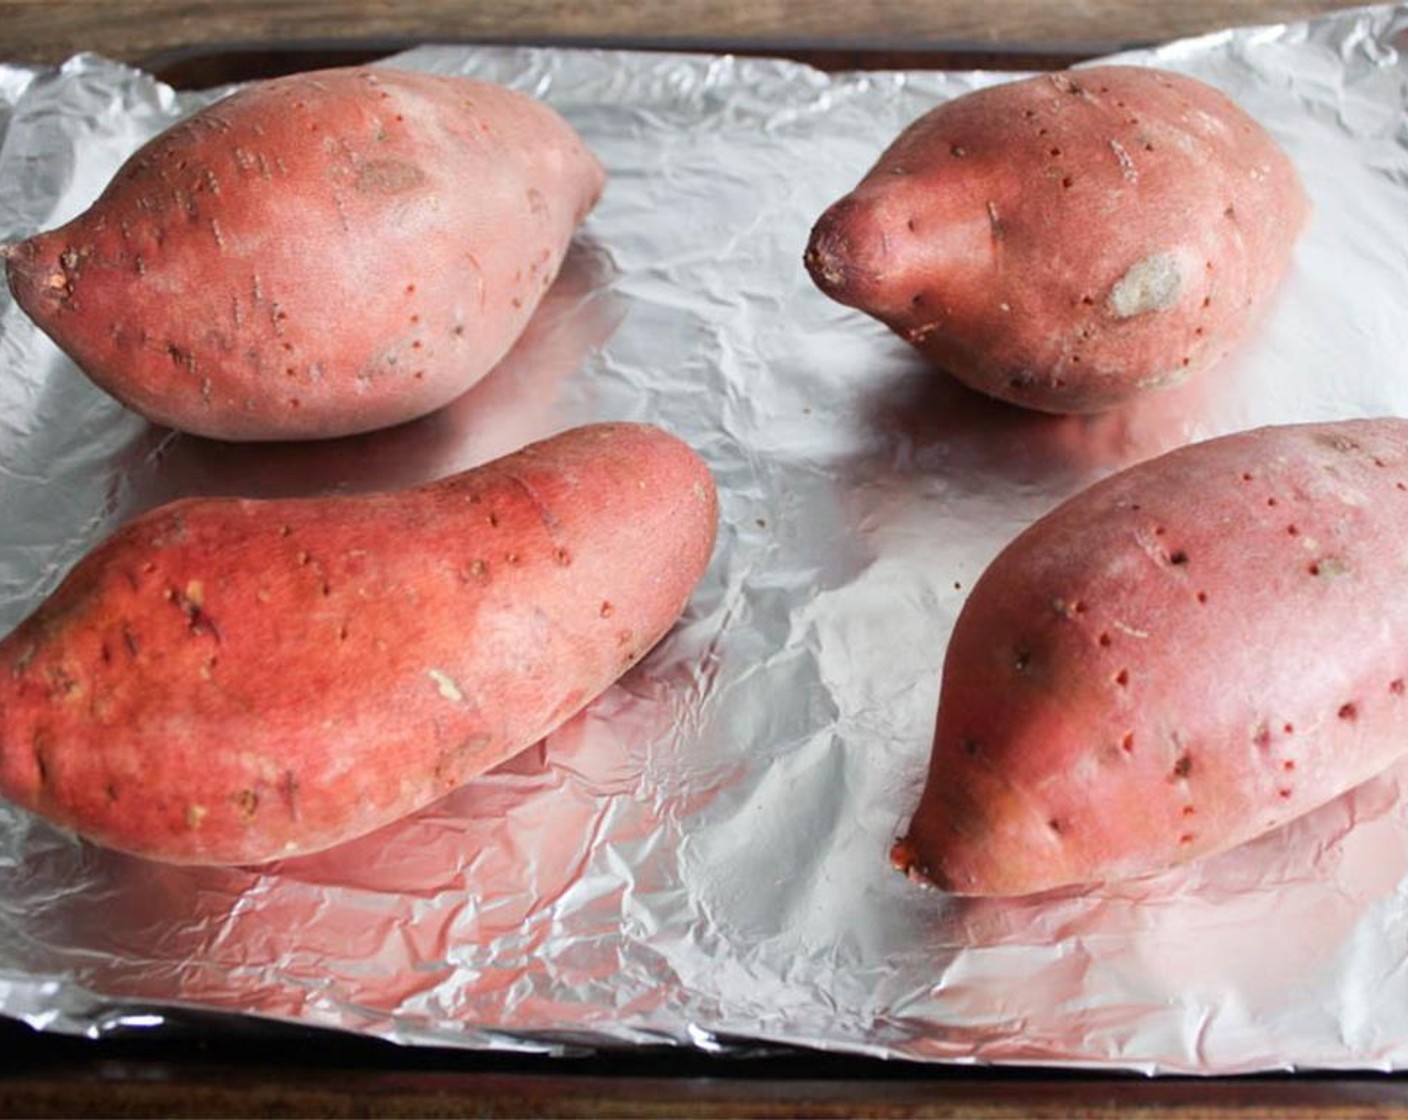 step 2 Wash the Sweet Potatoes (4) and dry them well. Use a fork to carefully poke holes all over the sweet potatoes, about 2 fork pokes per side should do it, and place the sweet potatoes on the baking sheet.